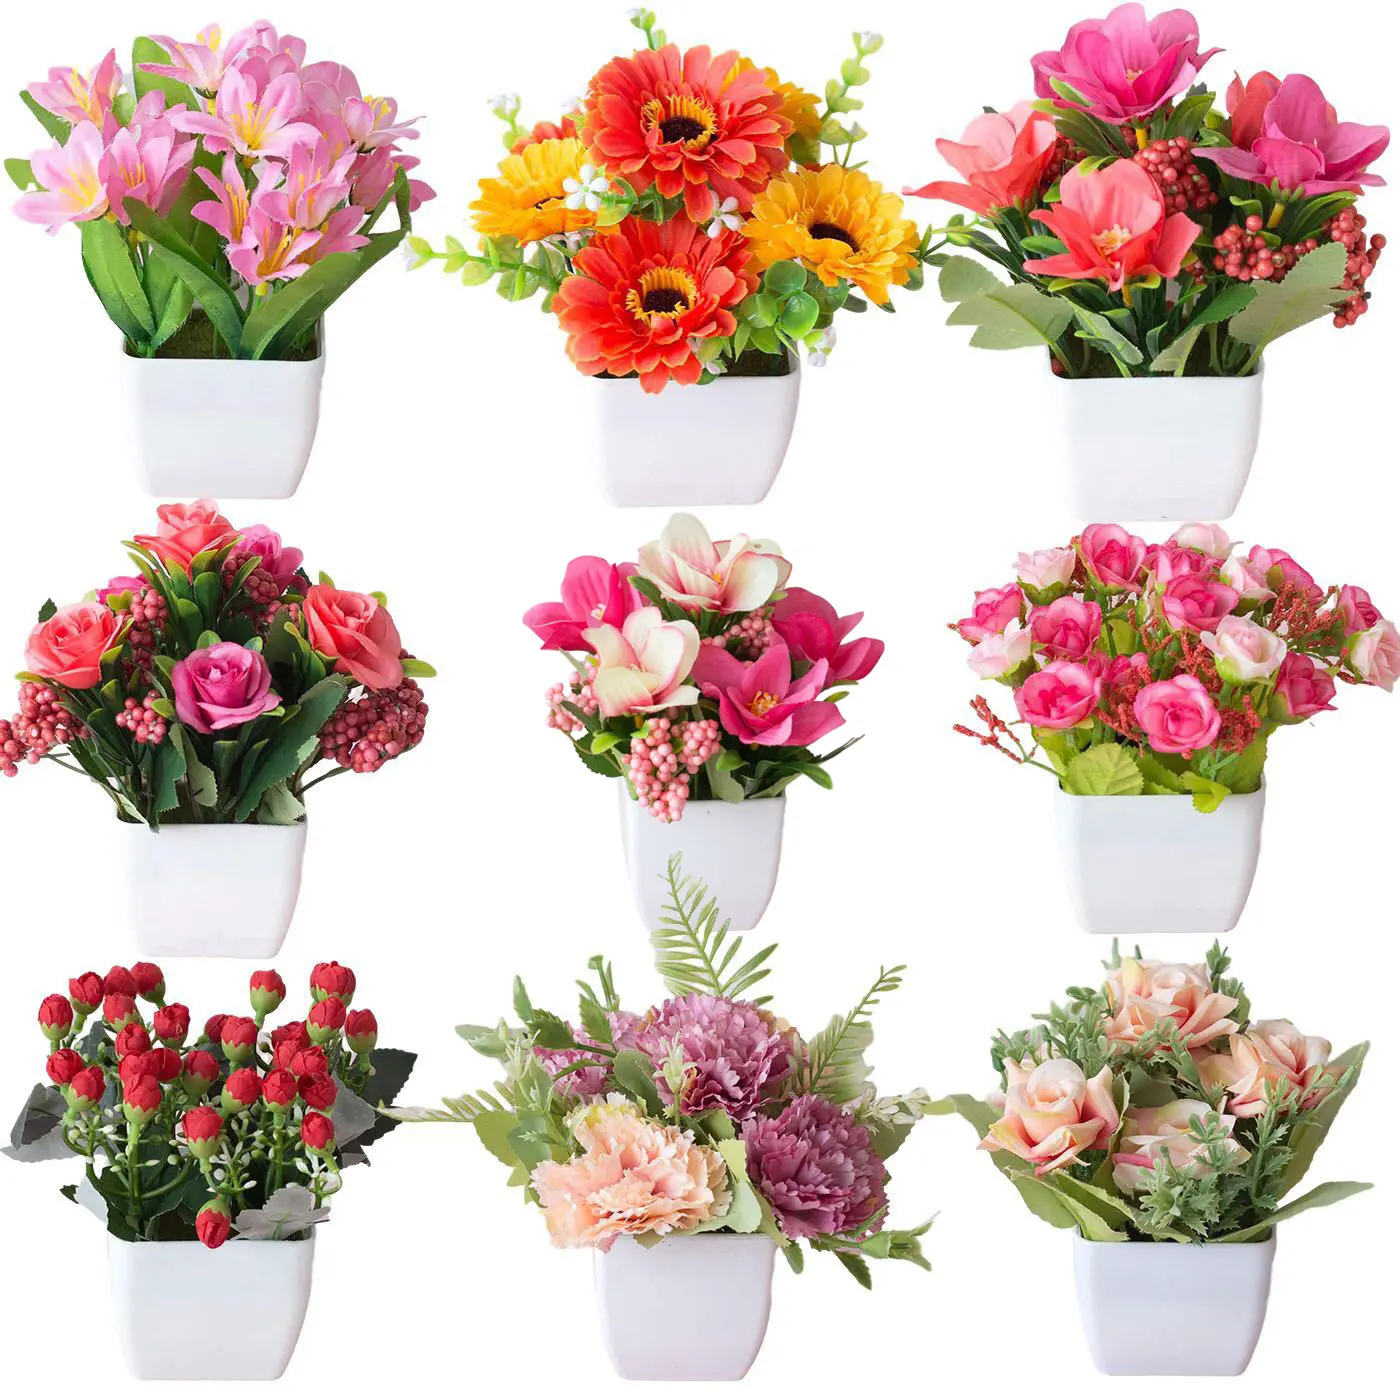 Wedding Arrangements Potted Artificial Flowers Real Touch Flowers in Pot for Home Office Decoration Desktop Decor